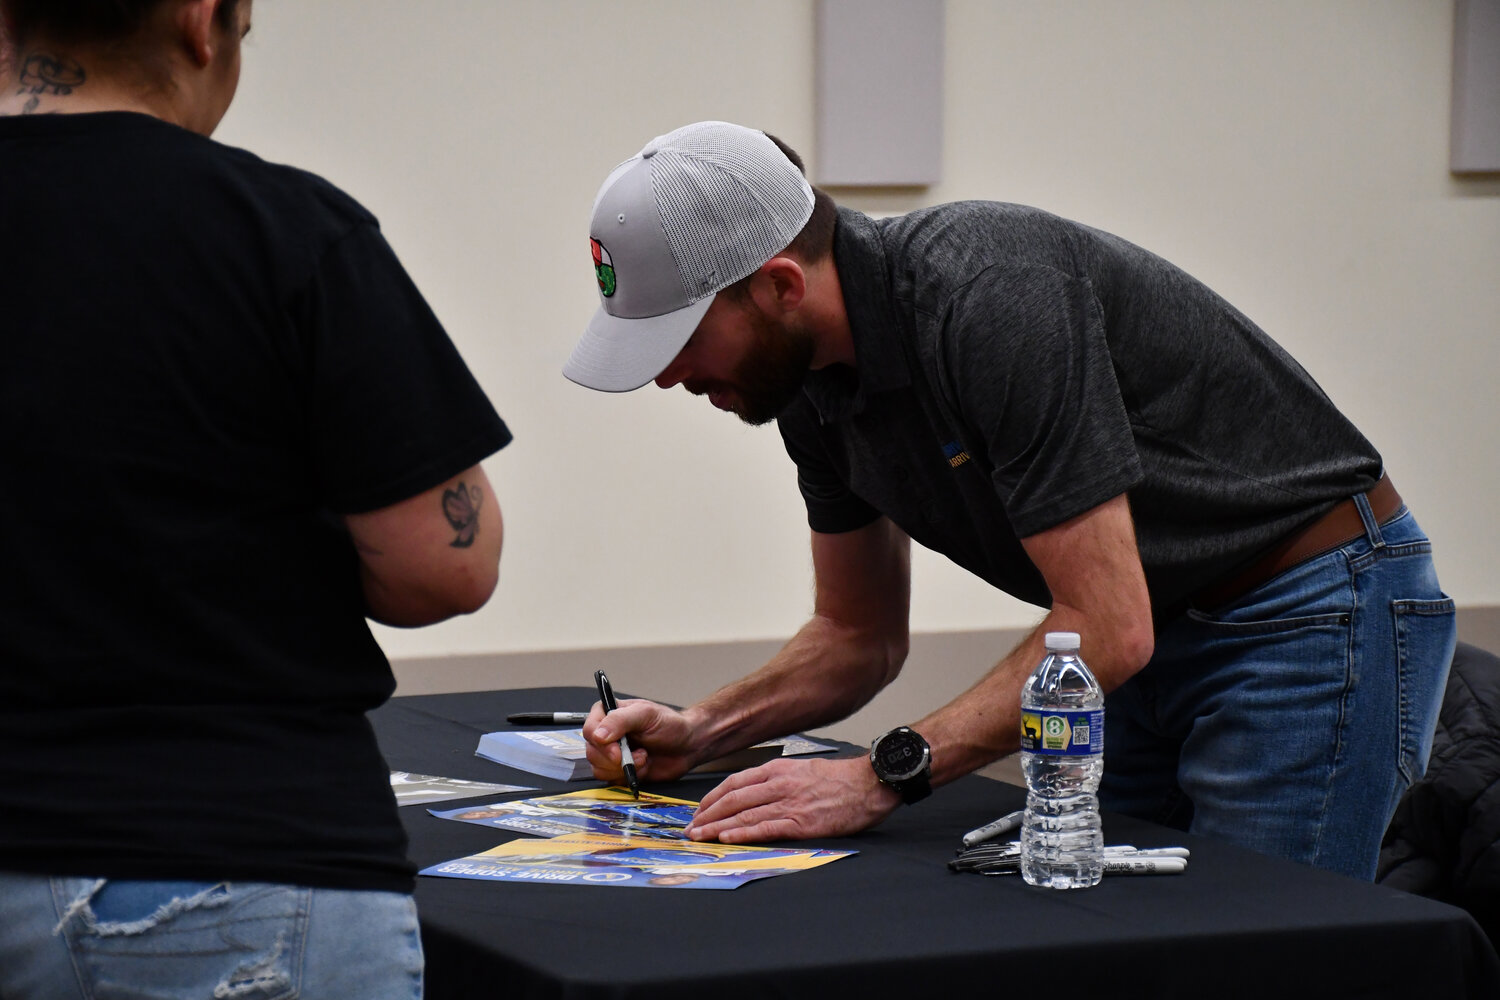 NASCAR driver Ross Chastain signs autographs for his fans in Dover on Thursday.